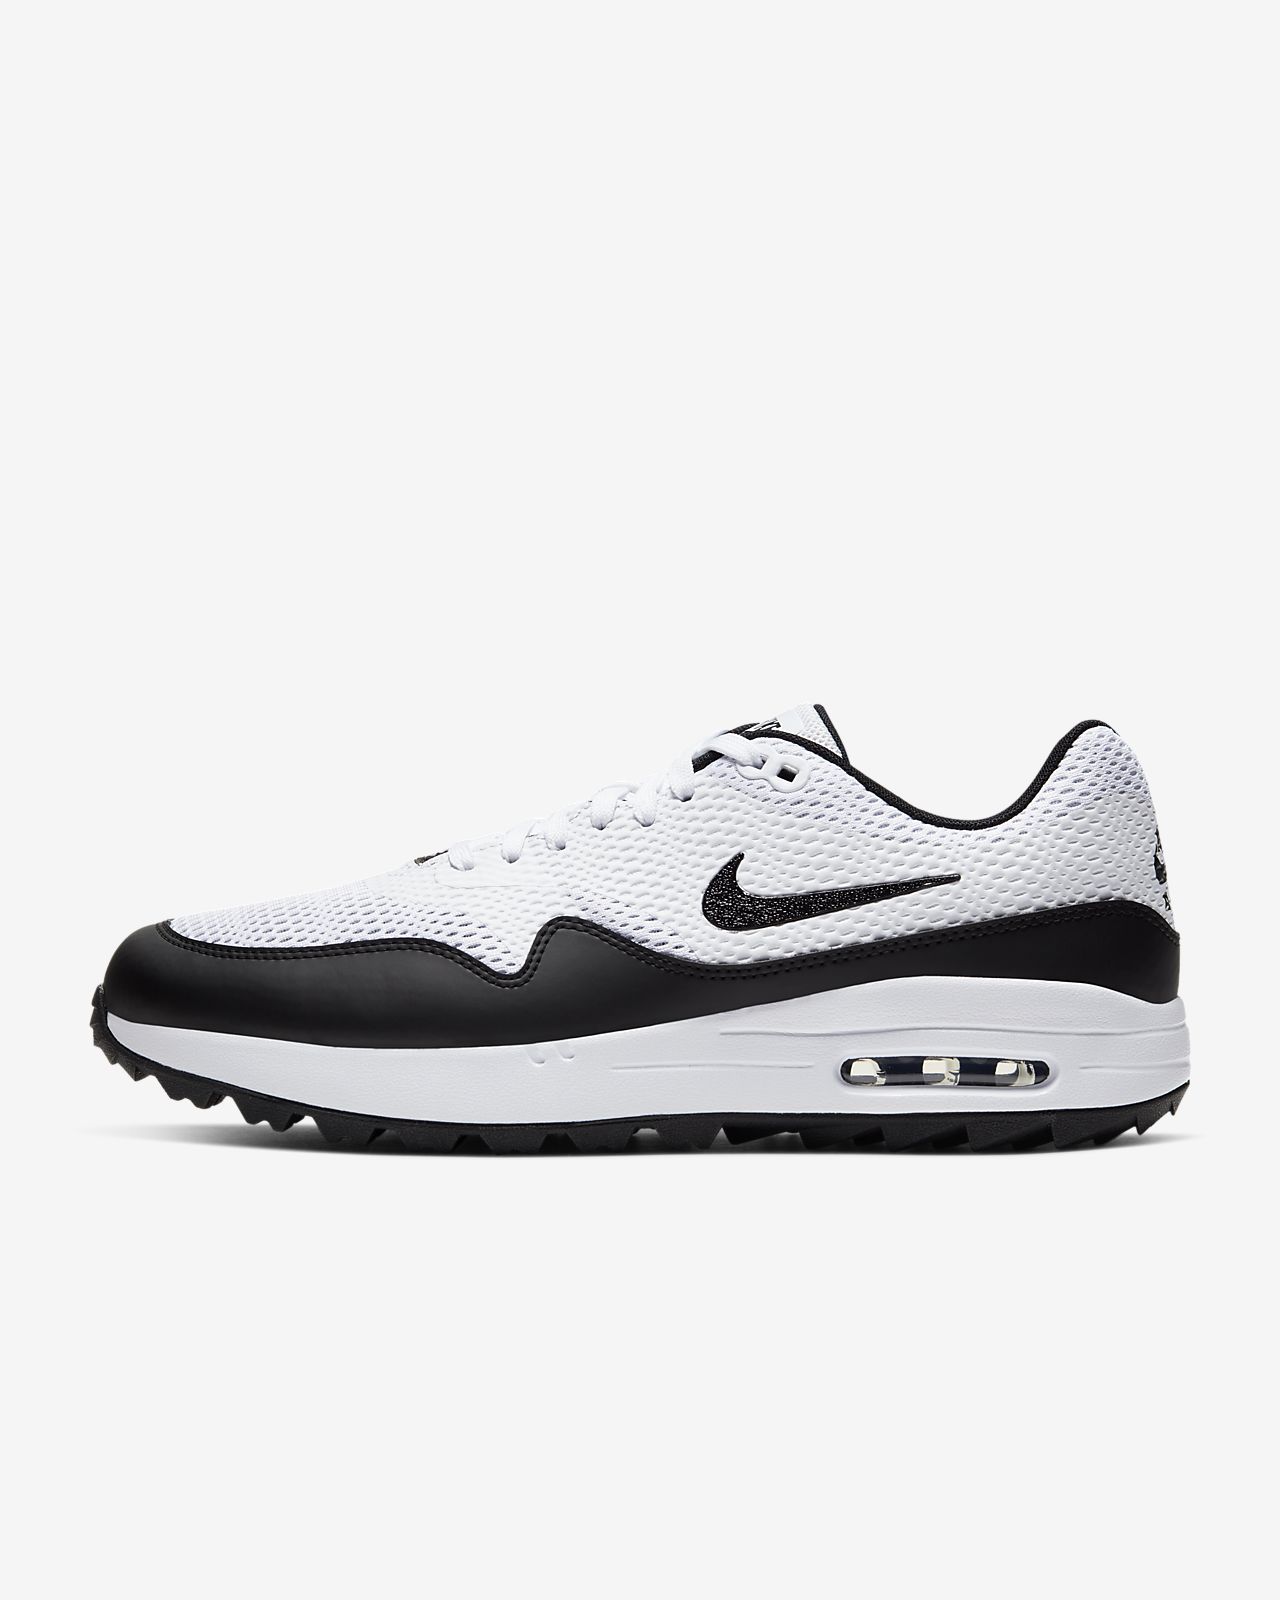 air 97 just do it